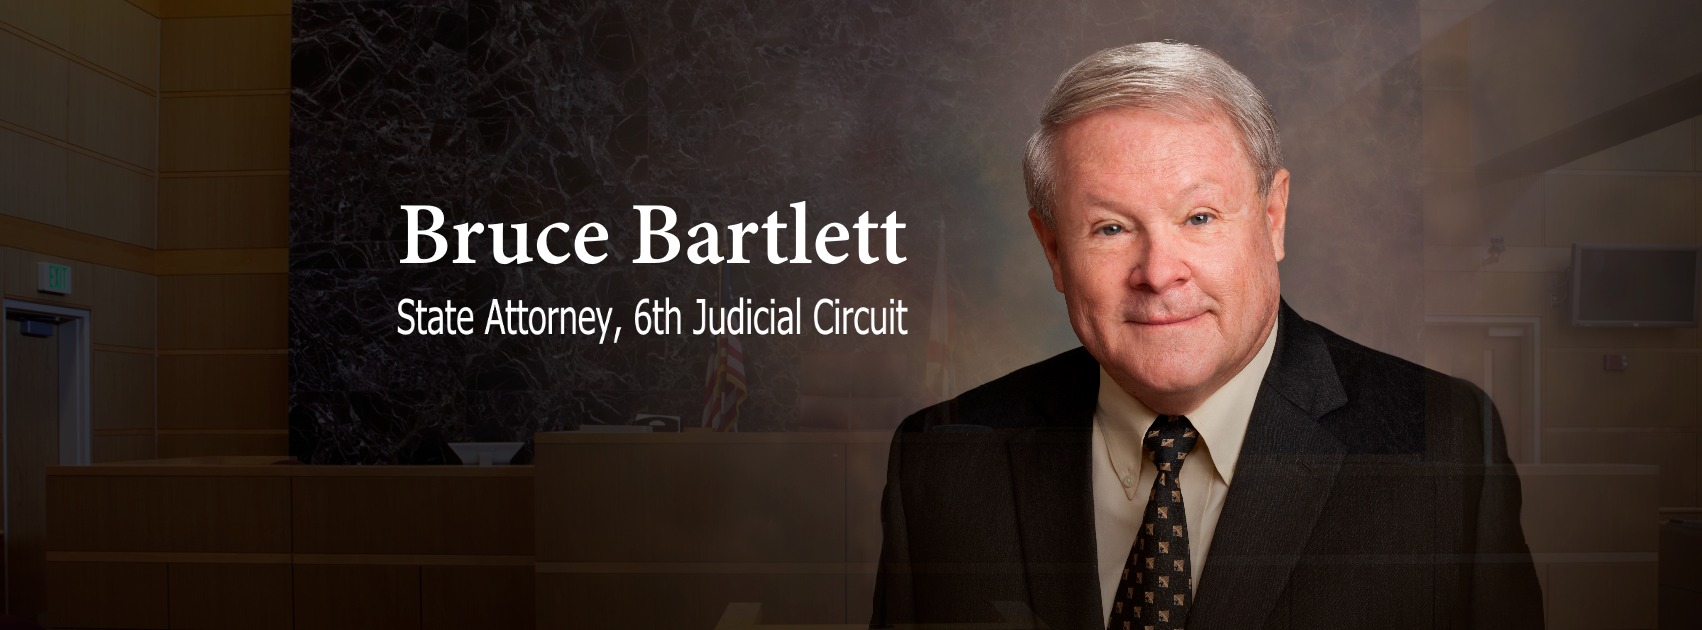 Office of the State Attorney, Sixth Judicial Circuit